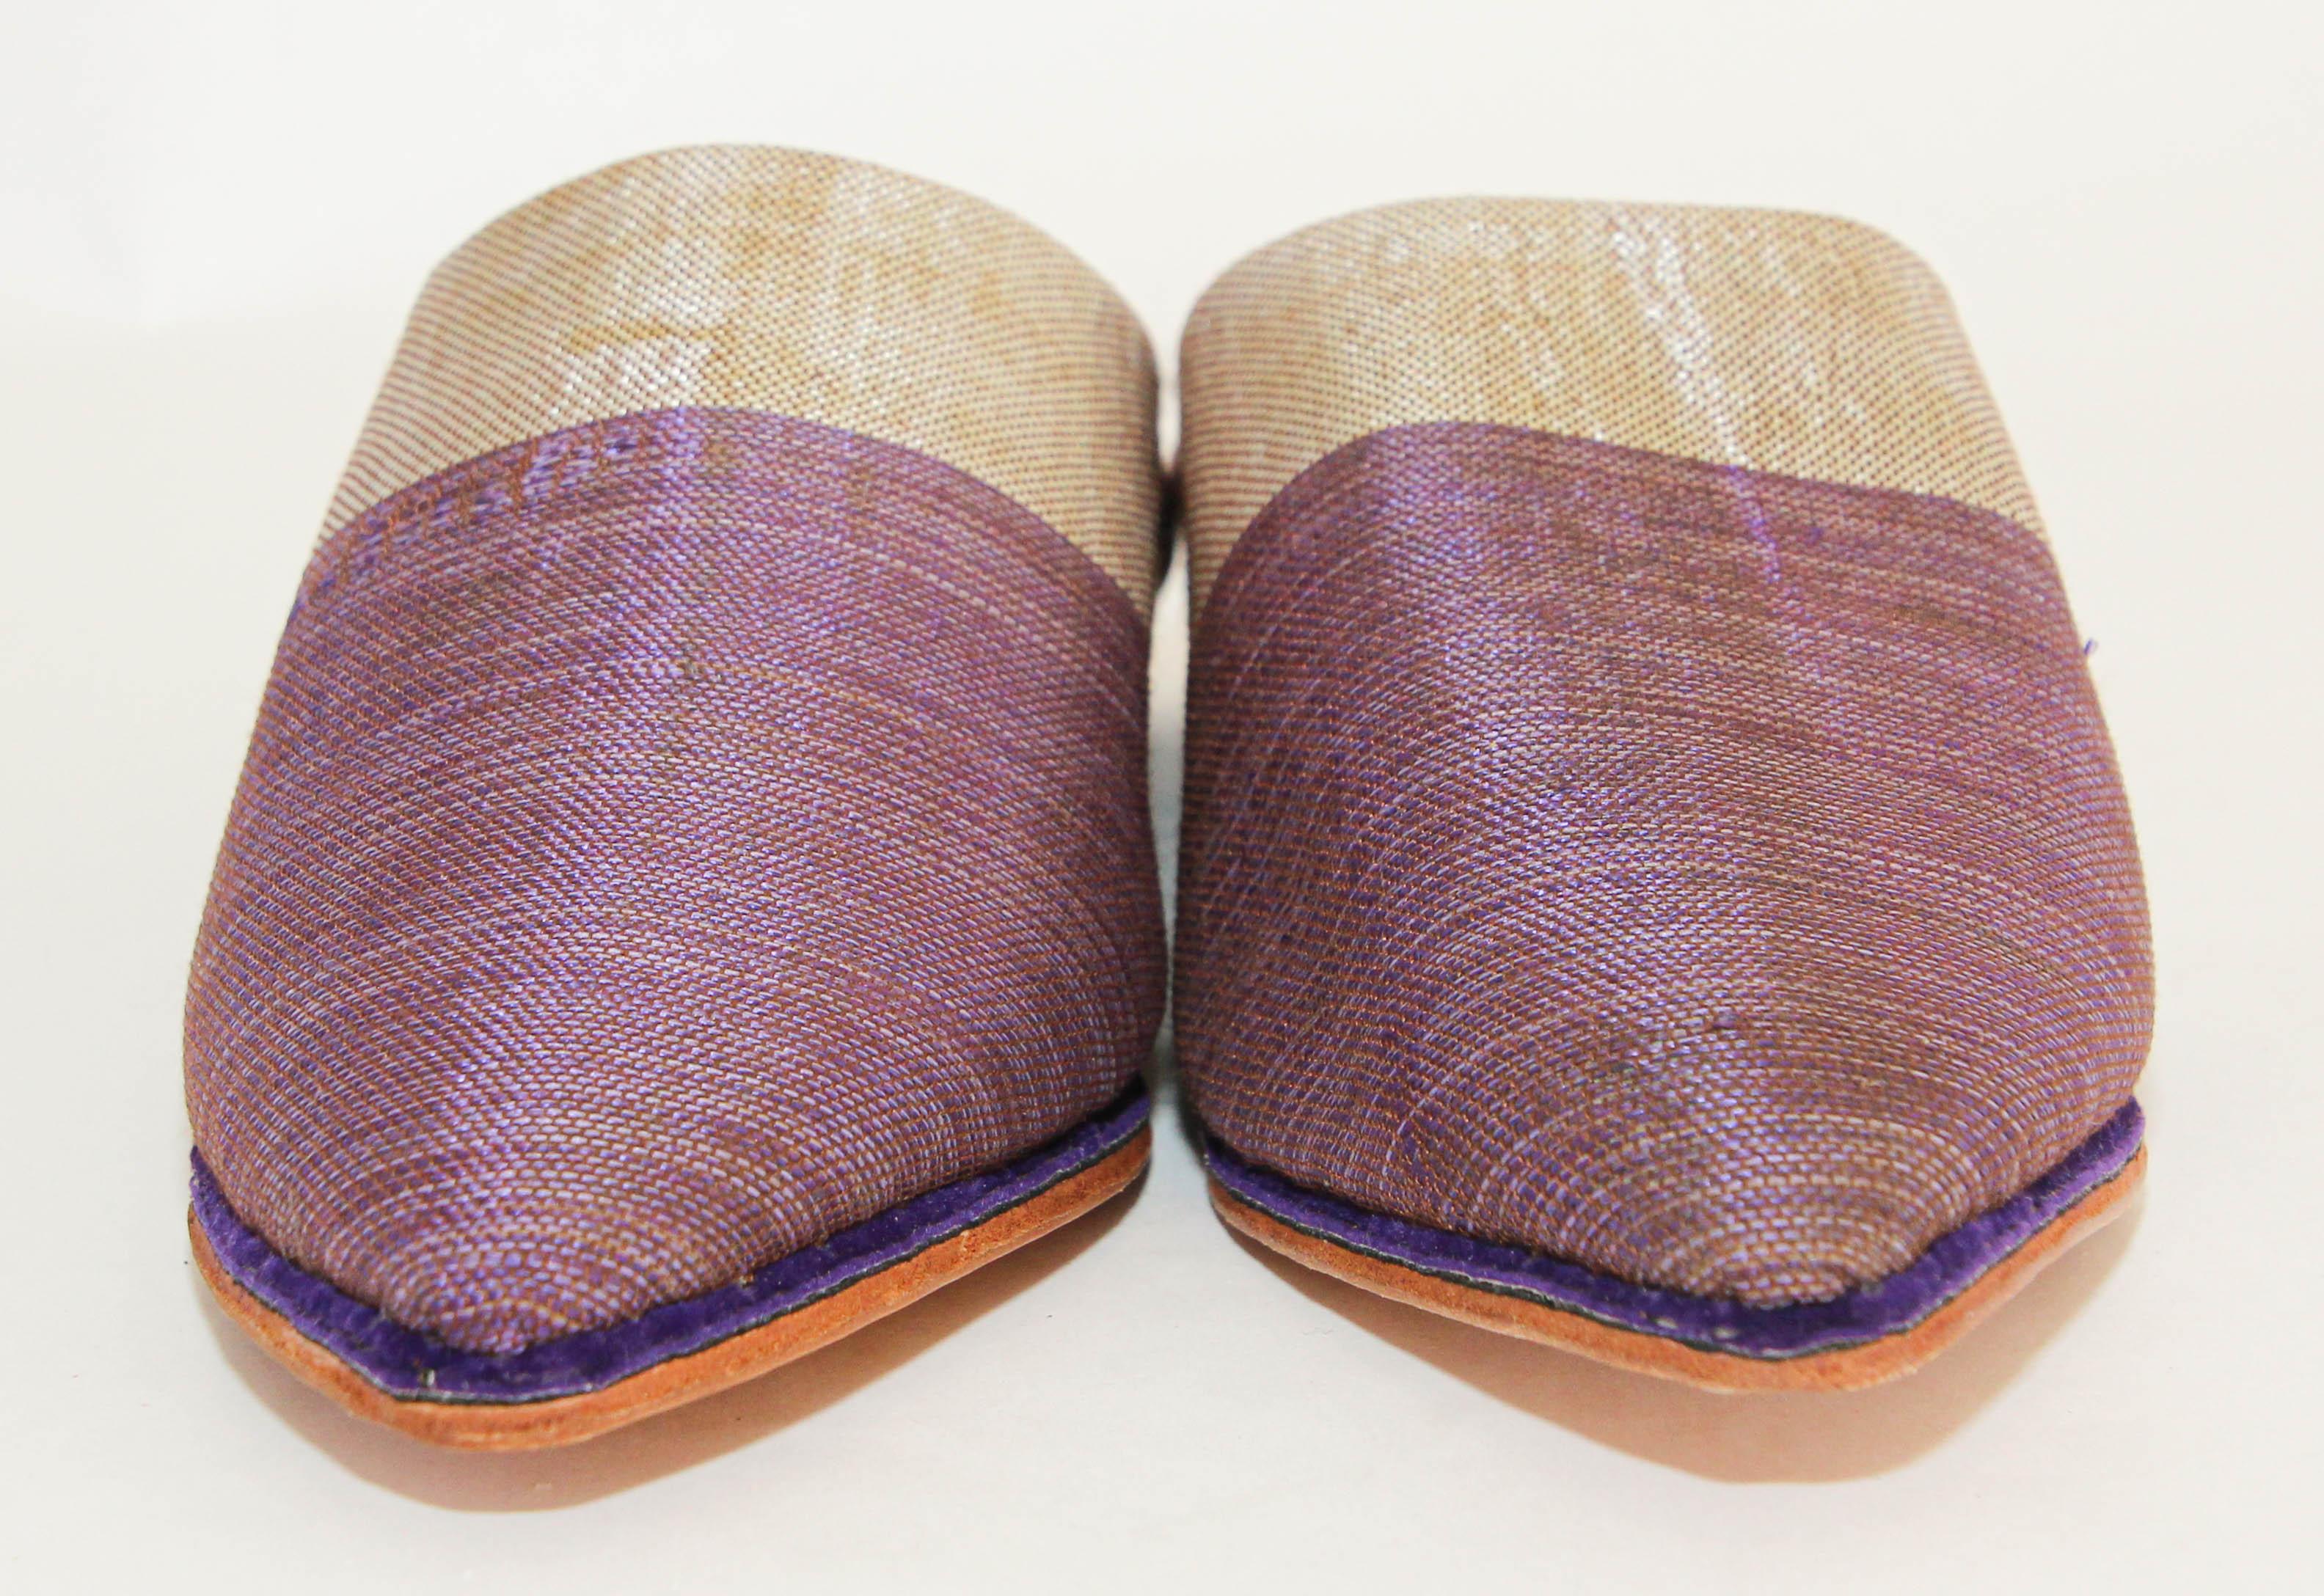 Moroccan Silk Slippers Babouches from Marrakech Pointed Flat Mules.
Moroccan Silk Slippers Babouches, chic and soft.
These Moroccan silk slippers are handmade to perfection the inside sole is crafted of soft leather, hand-sewn leather sole.
You